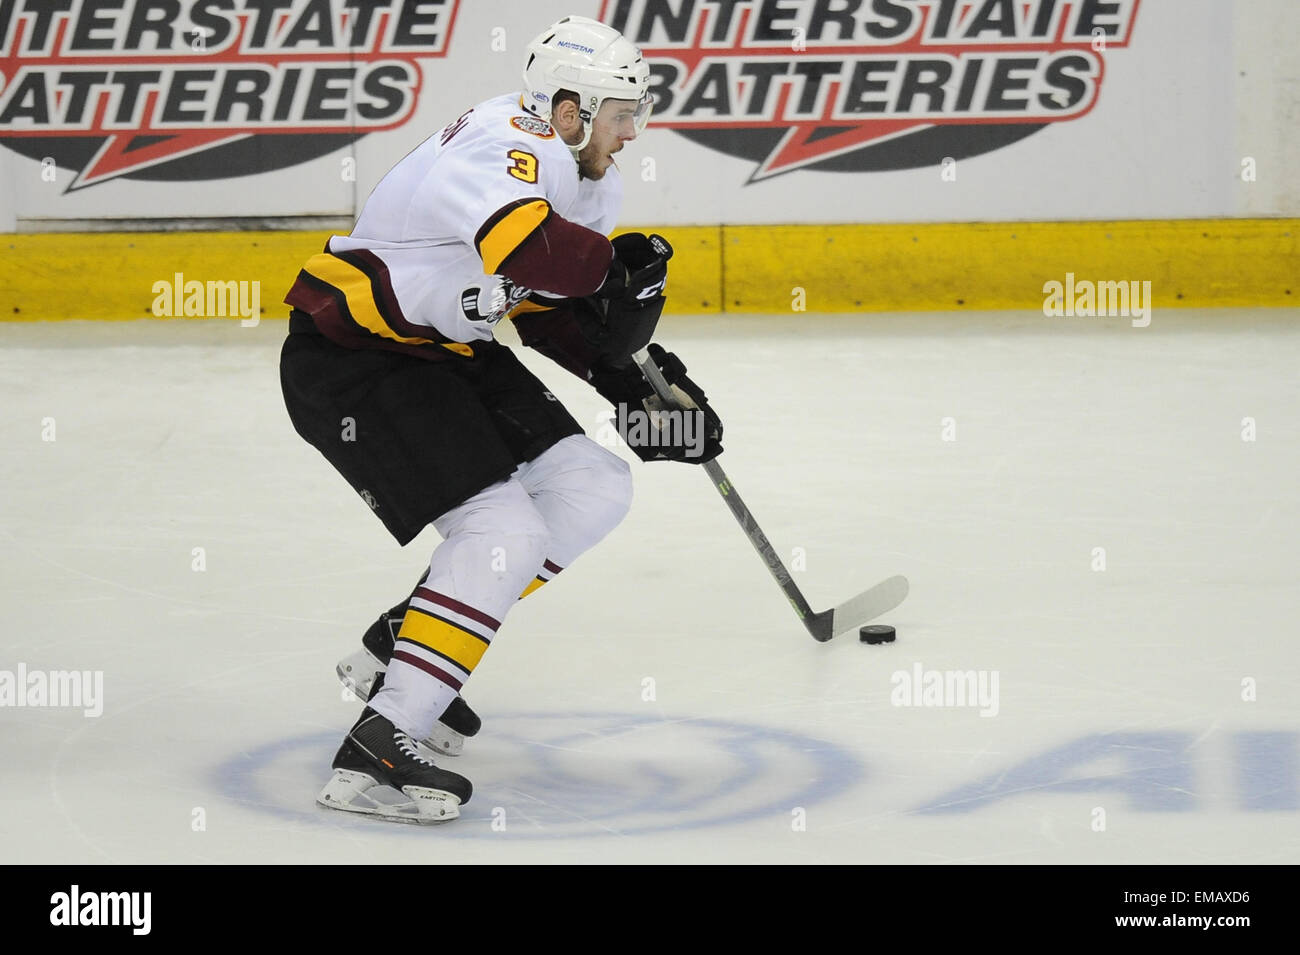 Rosemont, IL, USA. 18th Apr, 2015. Chicago Wolves' Joel Edmundson (3) controls the puck during the American Hockey League game between the Milwaukee Admirals and the Chicago Wolves at the Allstate Arena in Rosemont, IL. Patrick Gorski/CSM/Alamy Live News Stock Photo